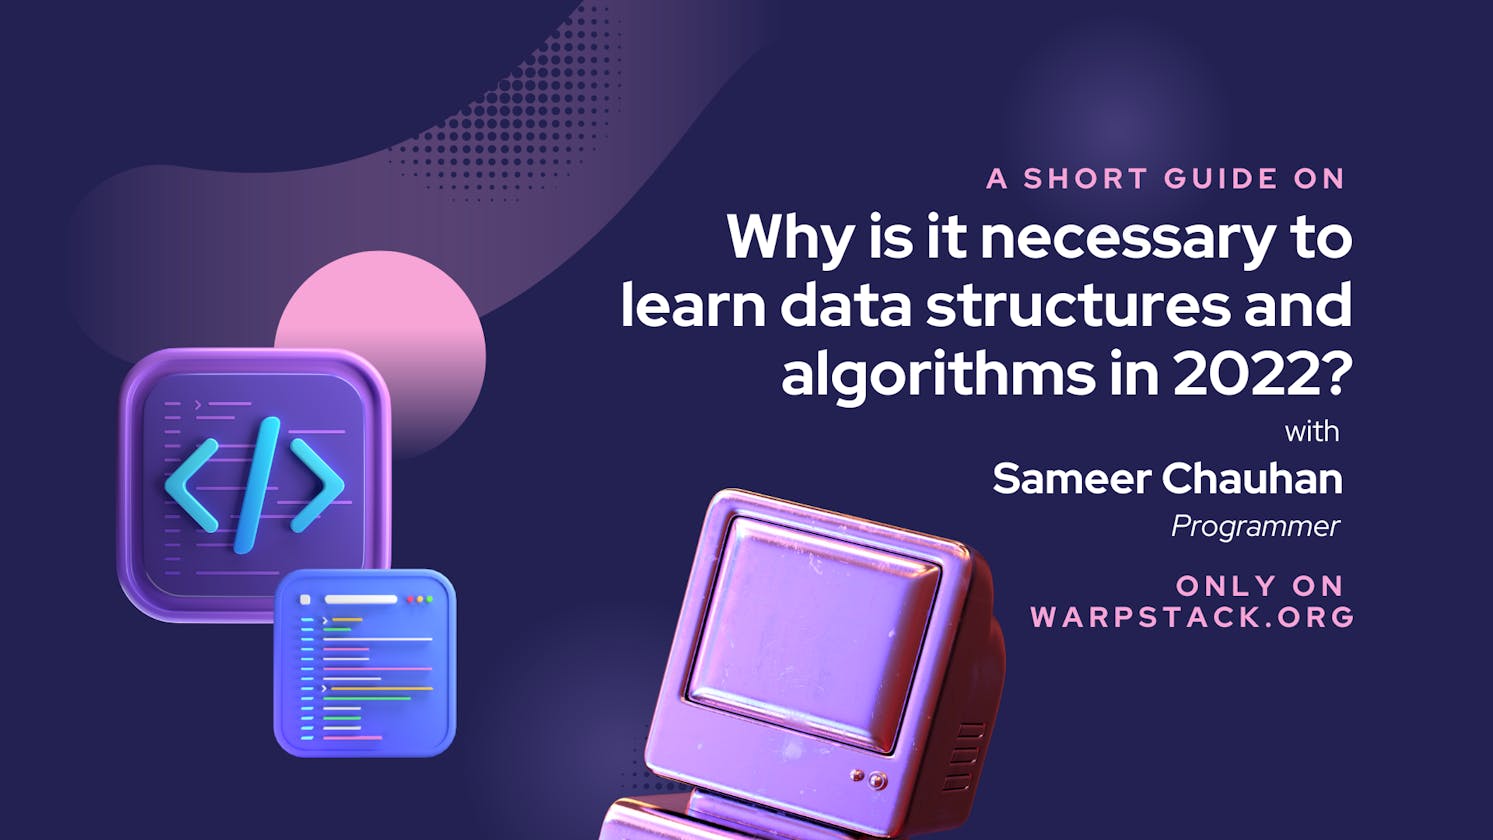 Why is it necessary to learn data structures and algorithms in 2022?